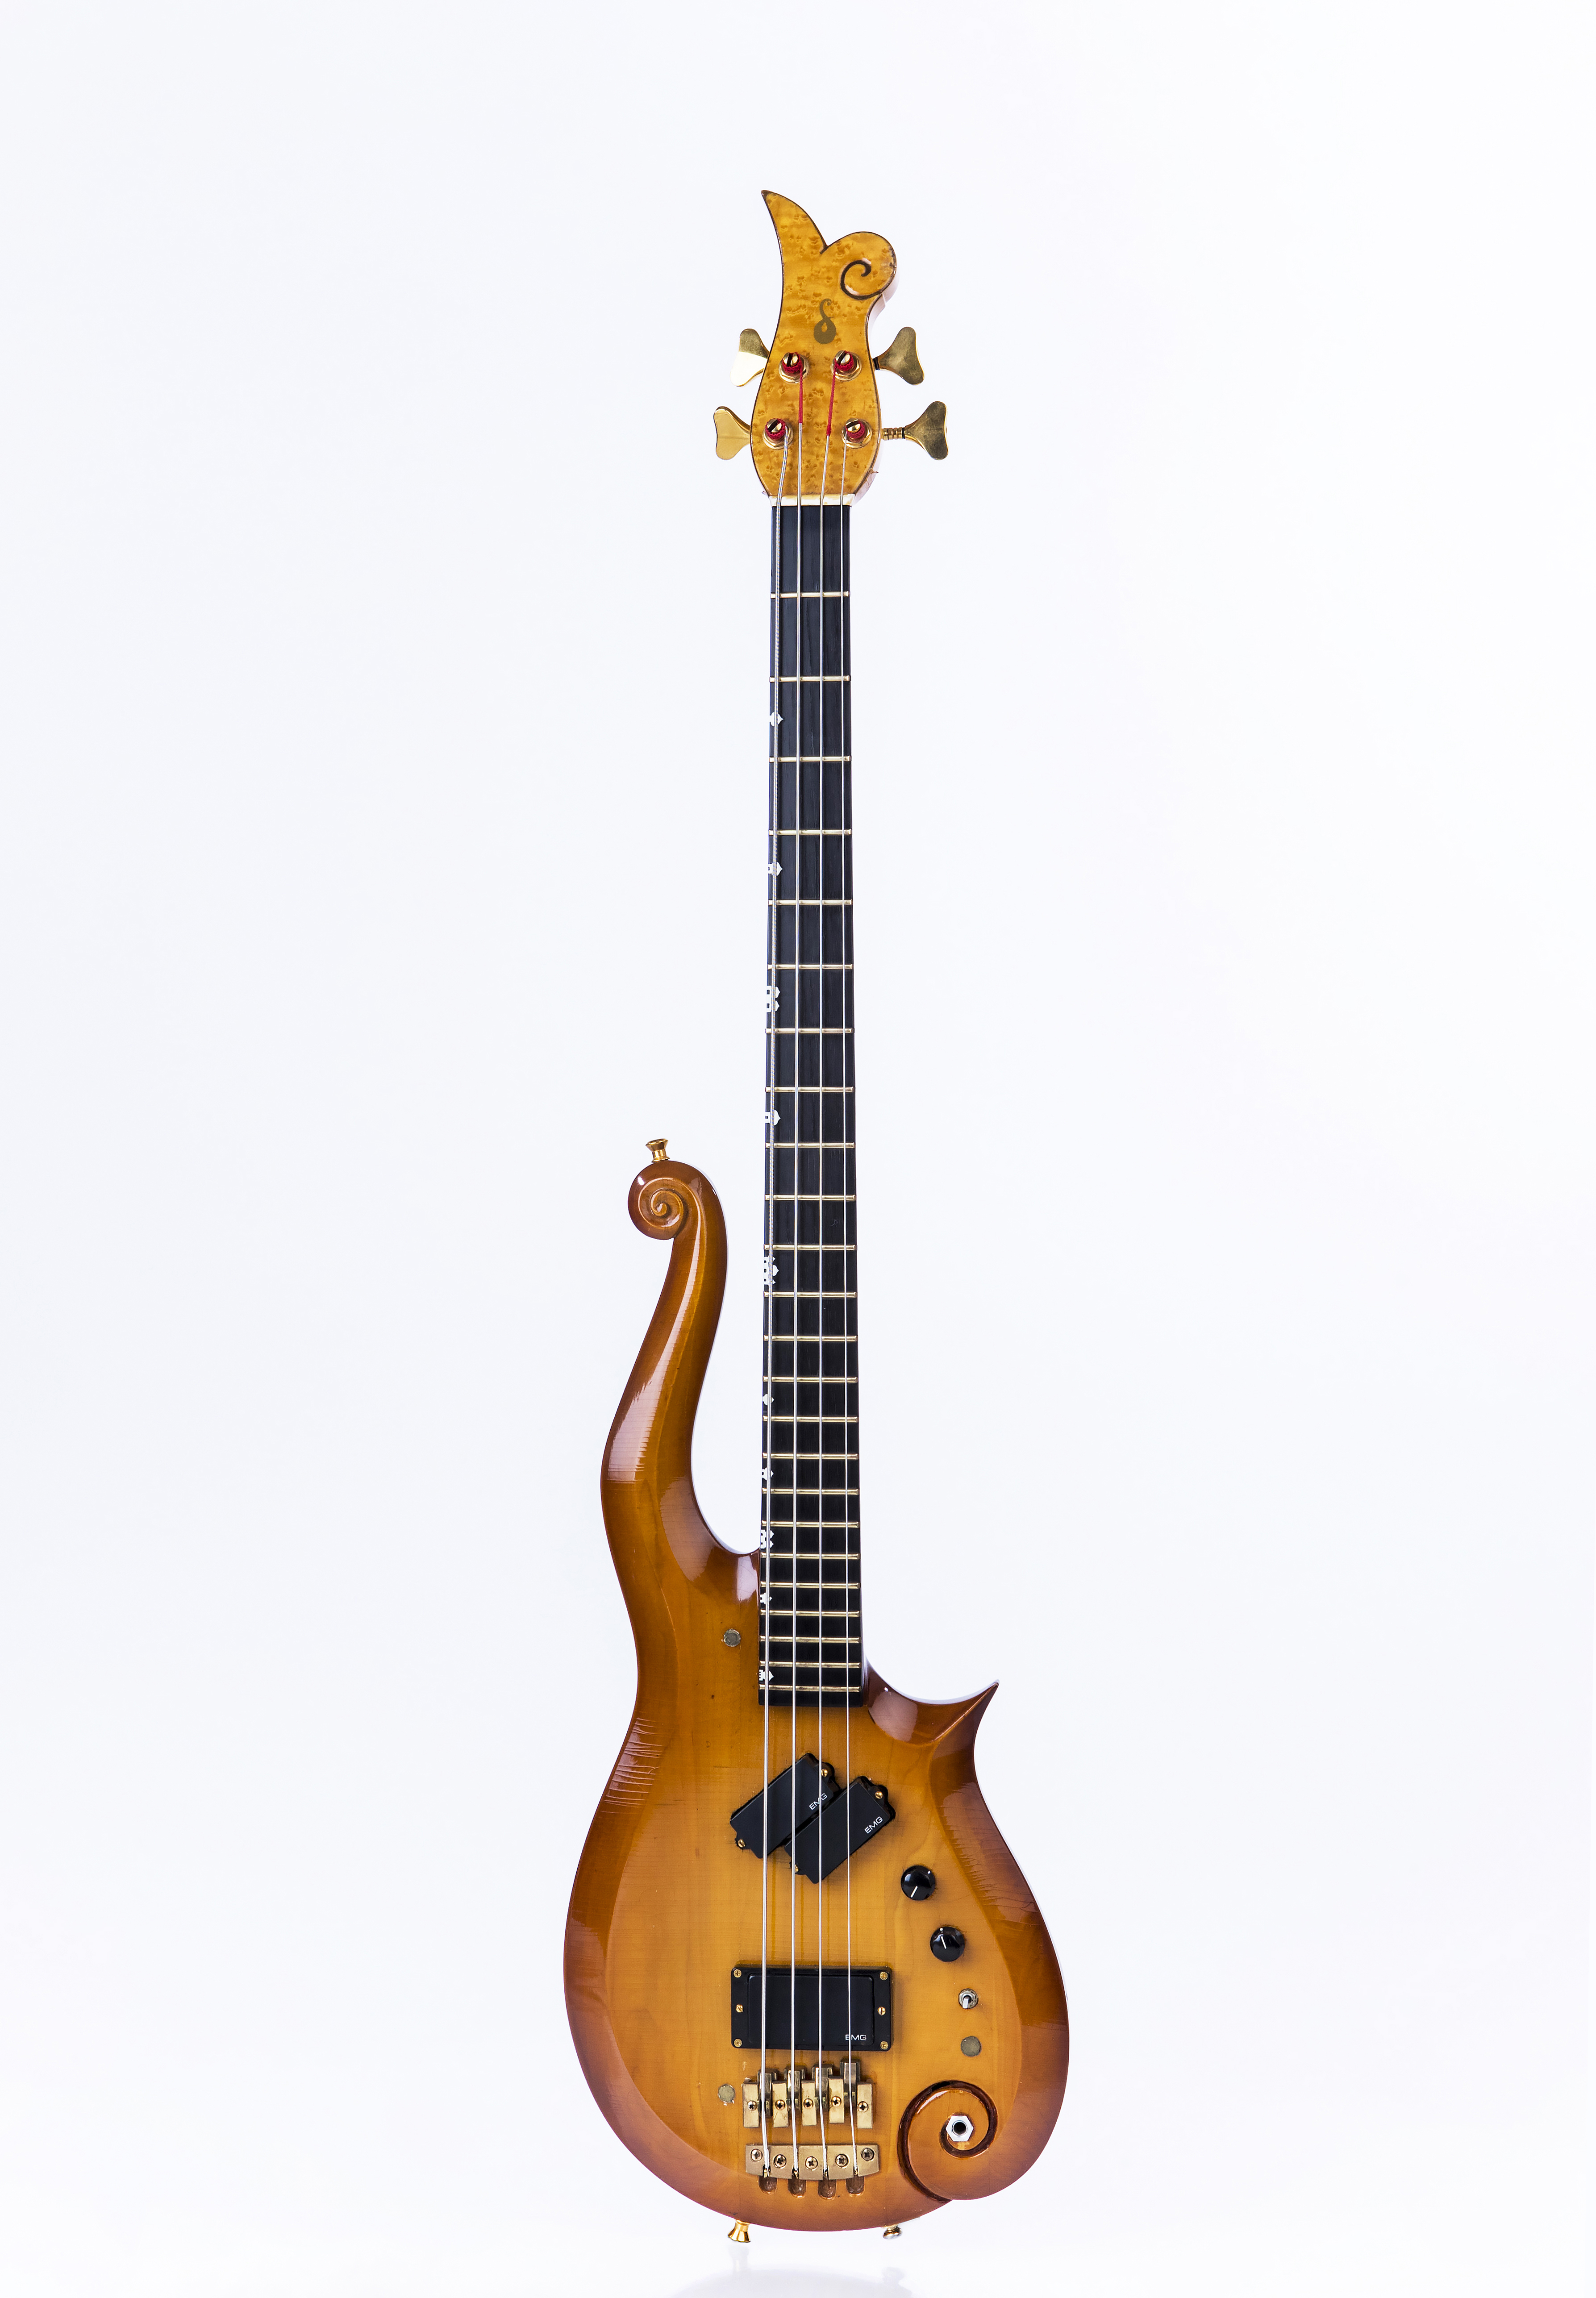 The original bass which became the inspiration for the Cloud guitar (John Wagner Photography)